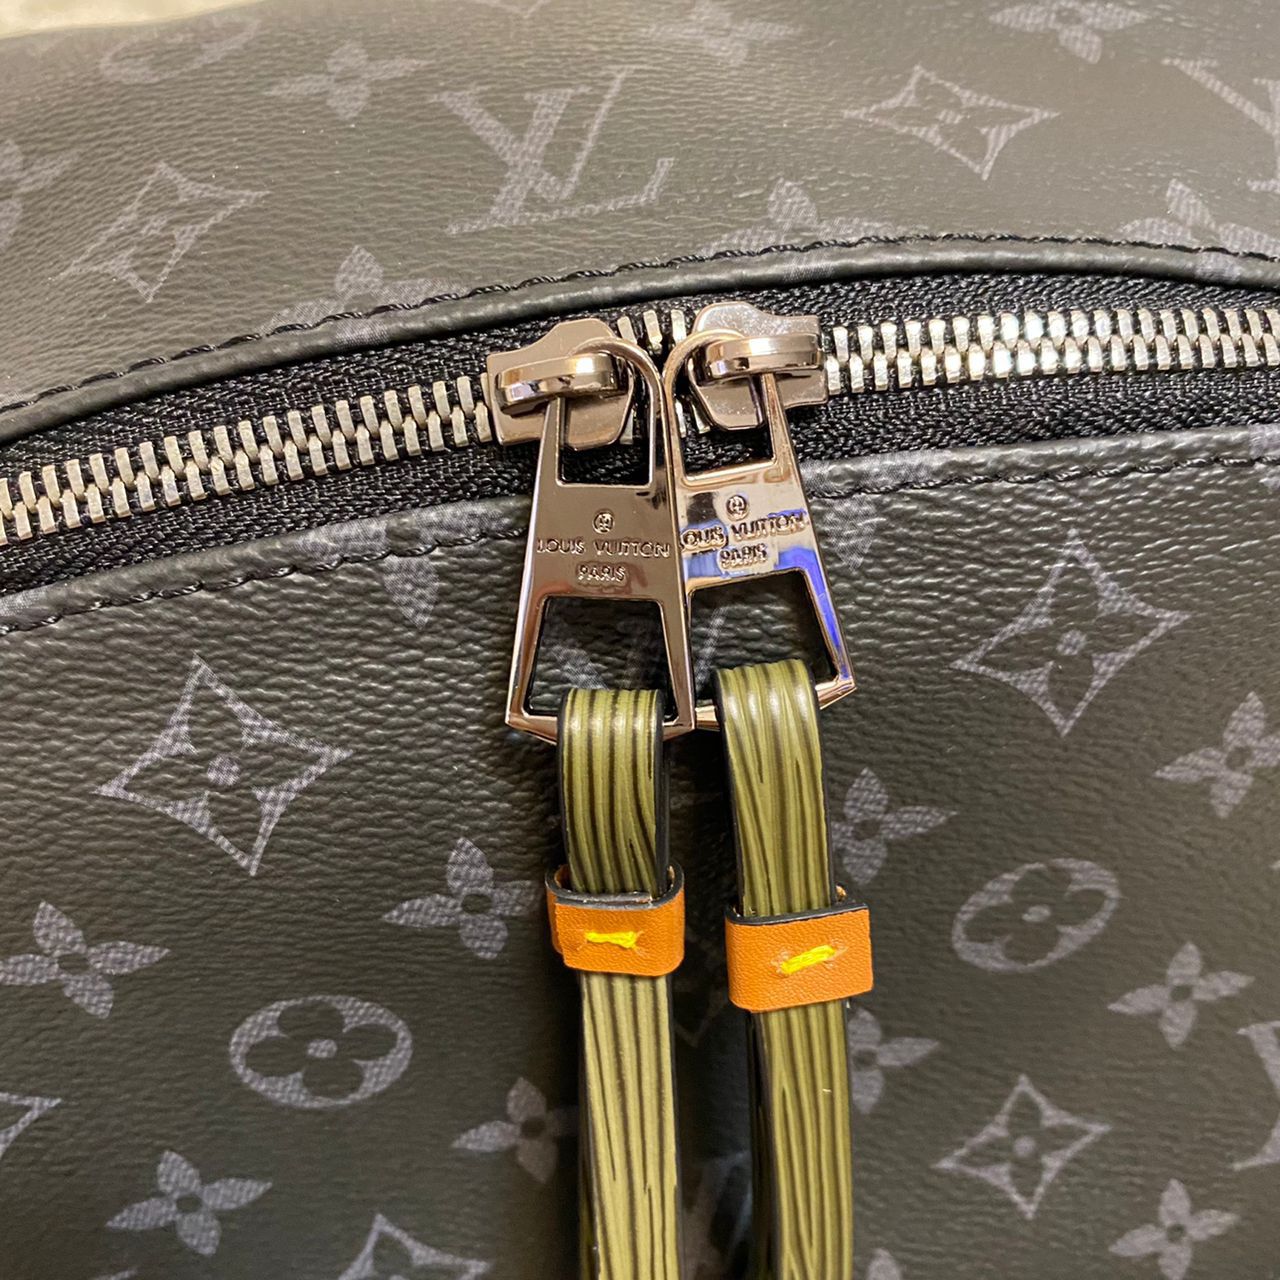 Louis Vuitton Monogram Leather Backpack for Sale in Philadelphia